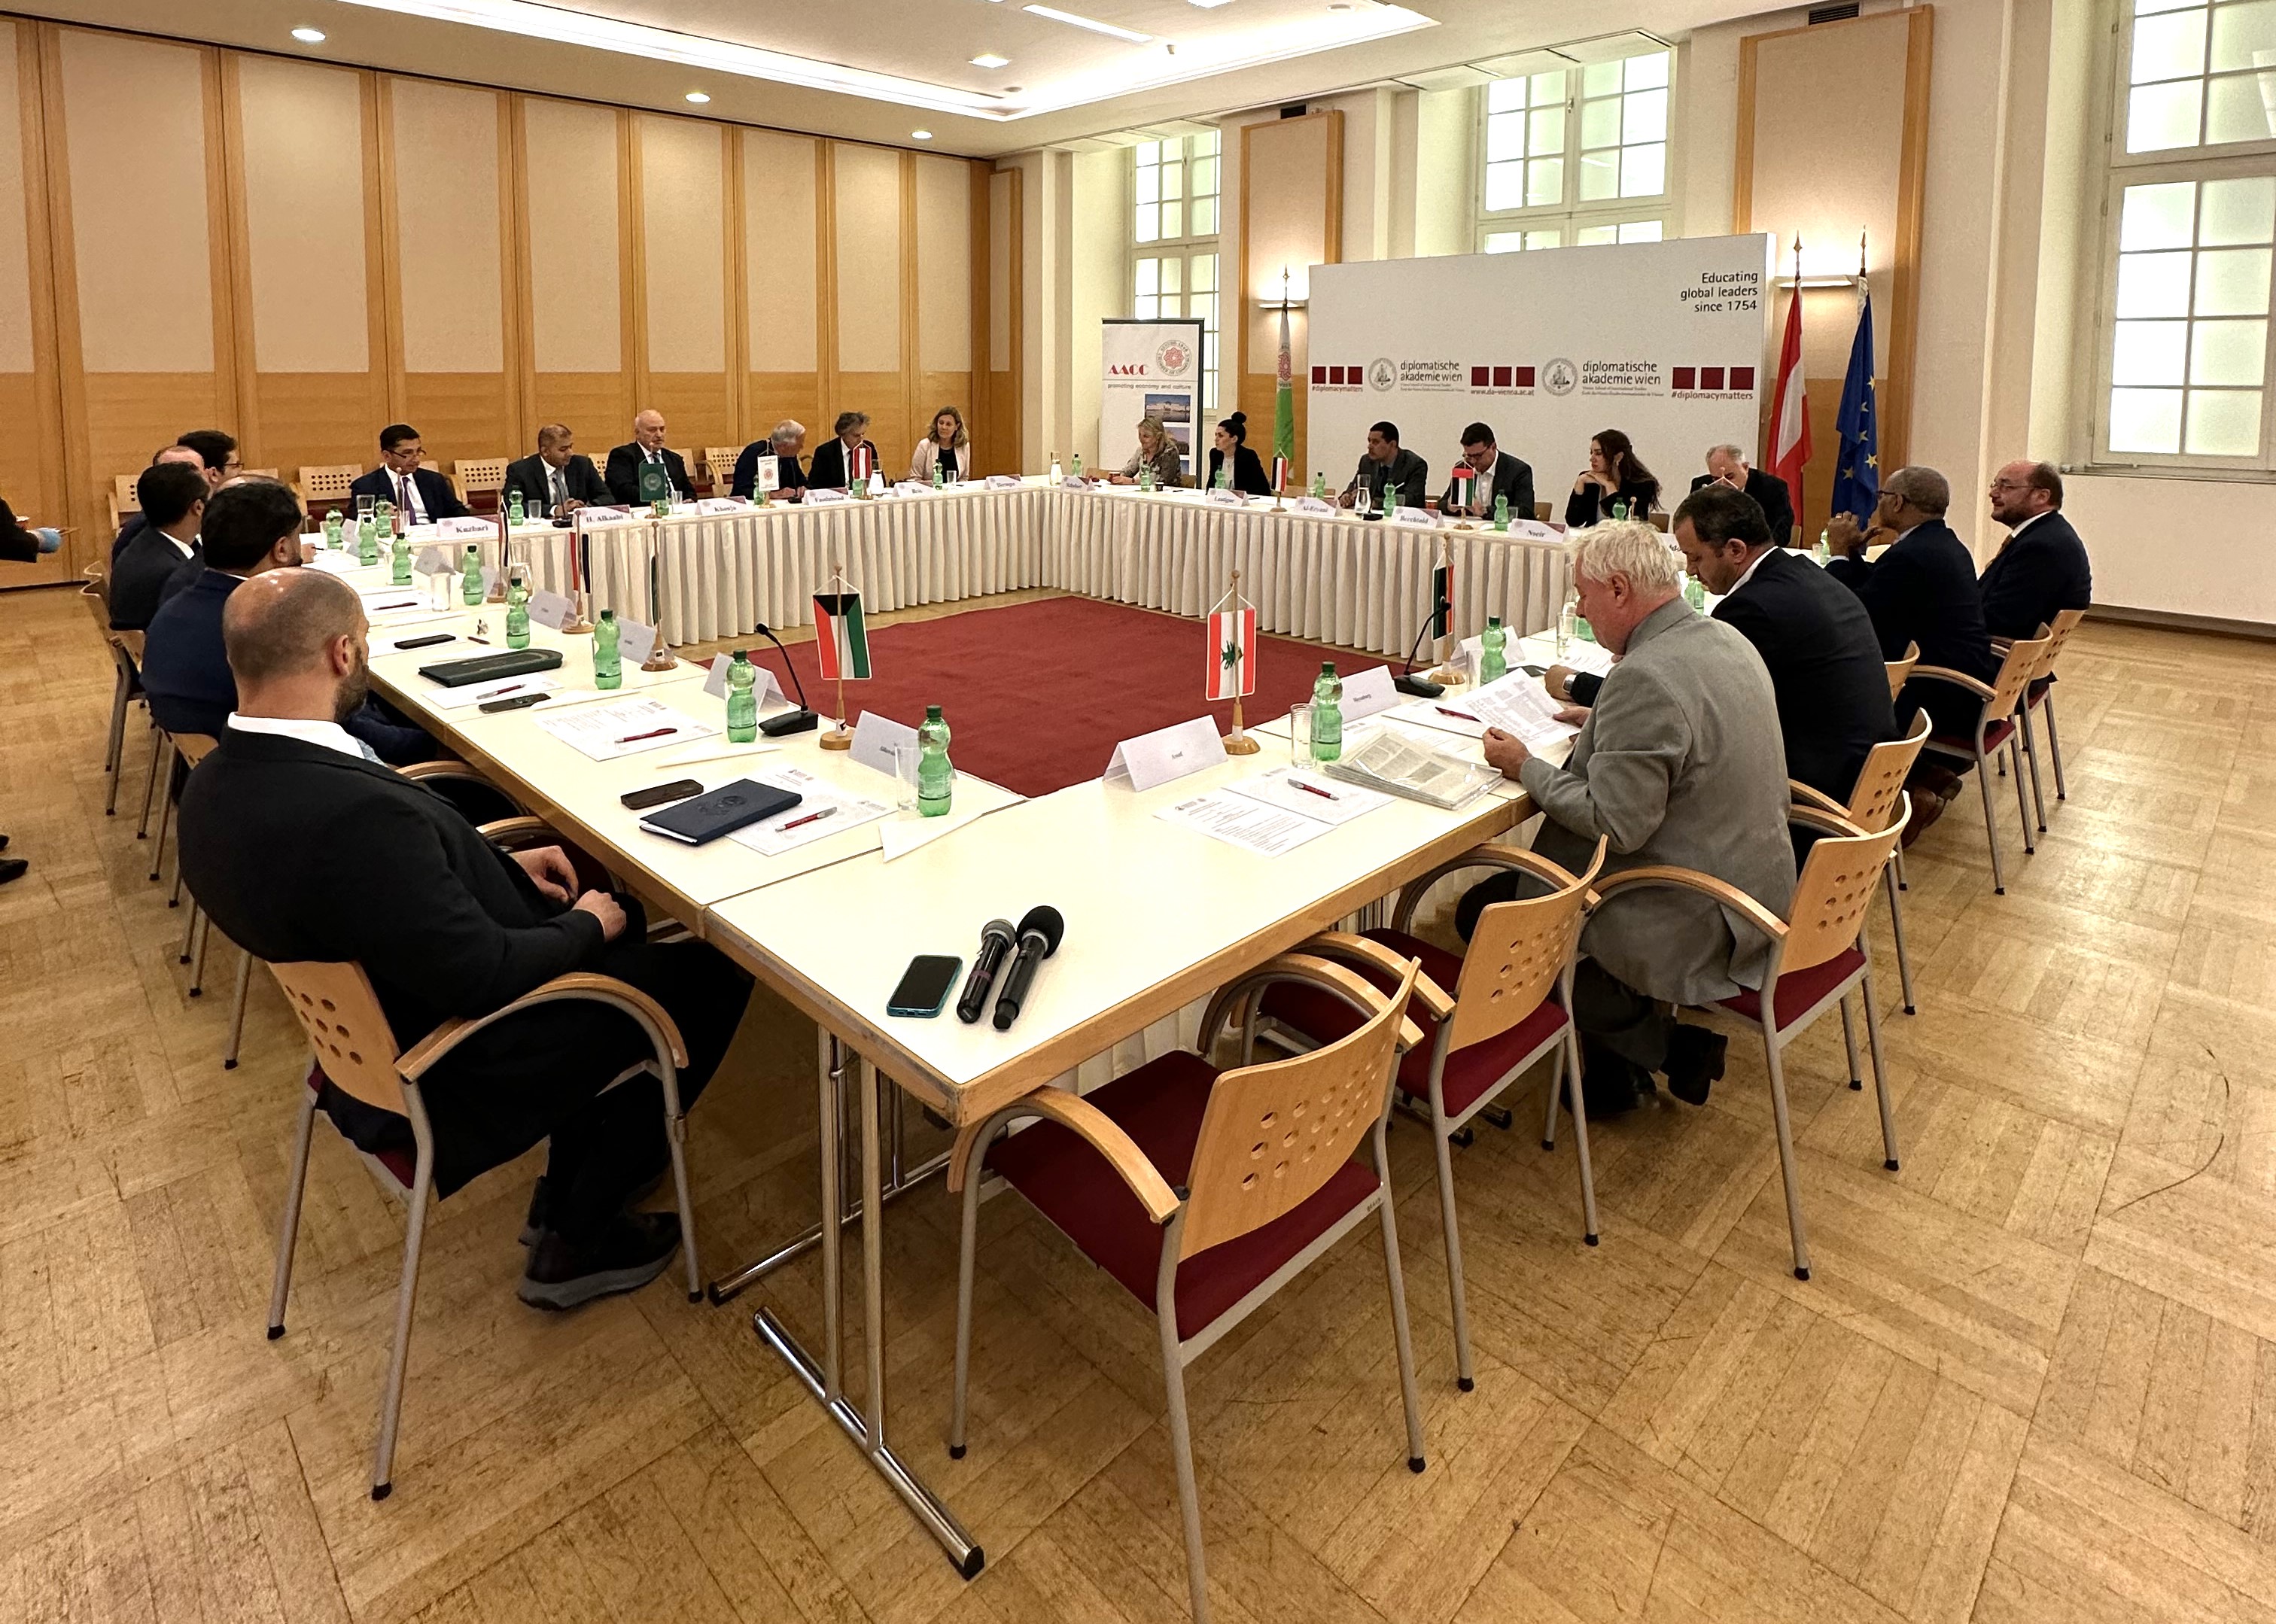 AACC organises the “Ambassadors’ Meeting” in collaboration with the Vienna School of International Studies